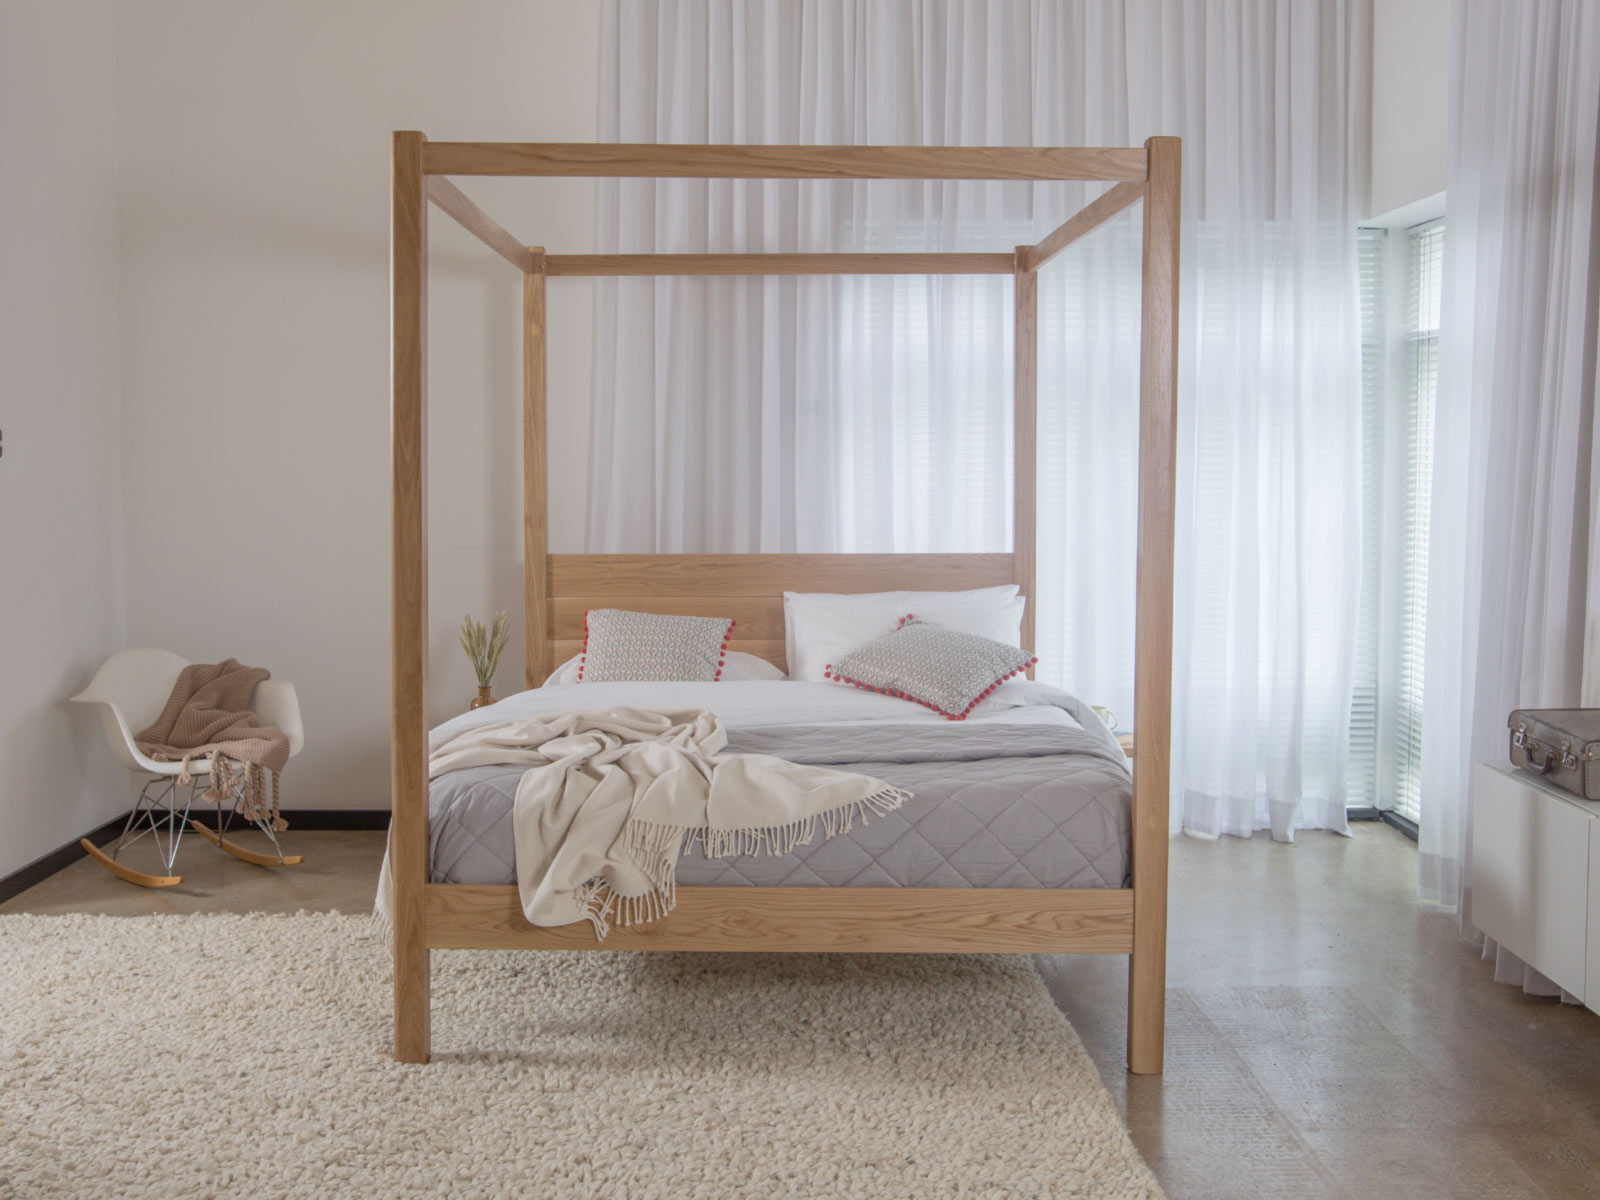 Four Poster Canopy Bed Classic Get, Why Do Four Poster Beds Have A Canopy